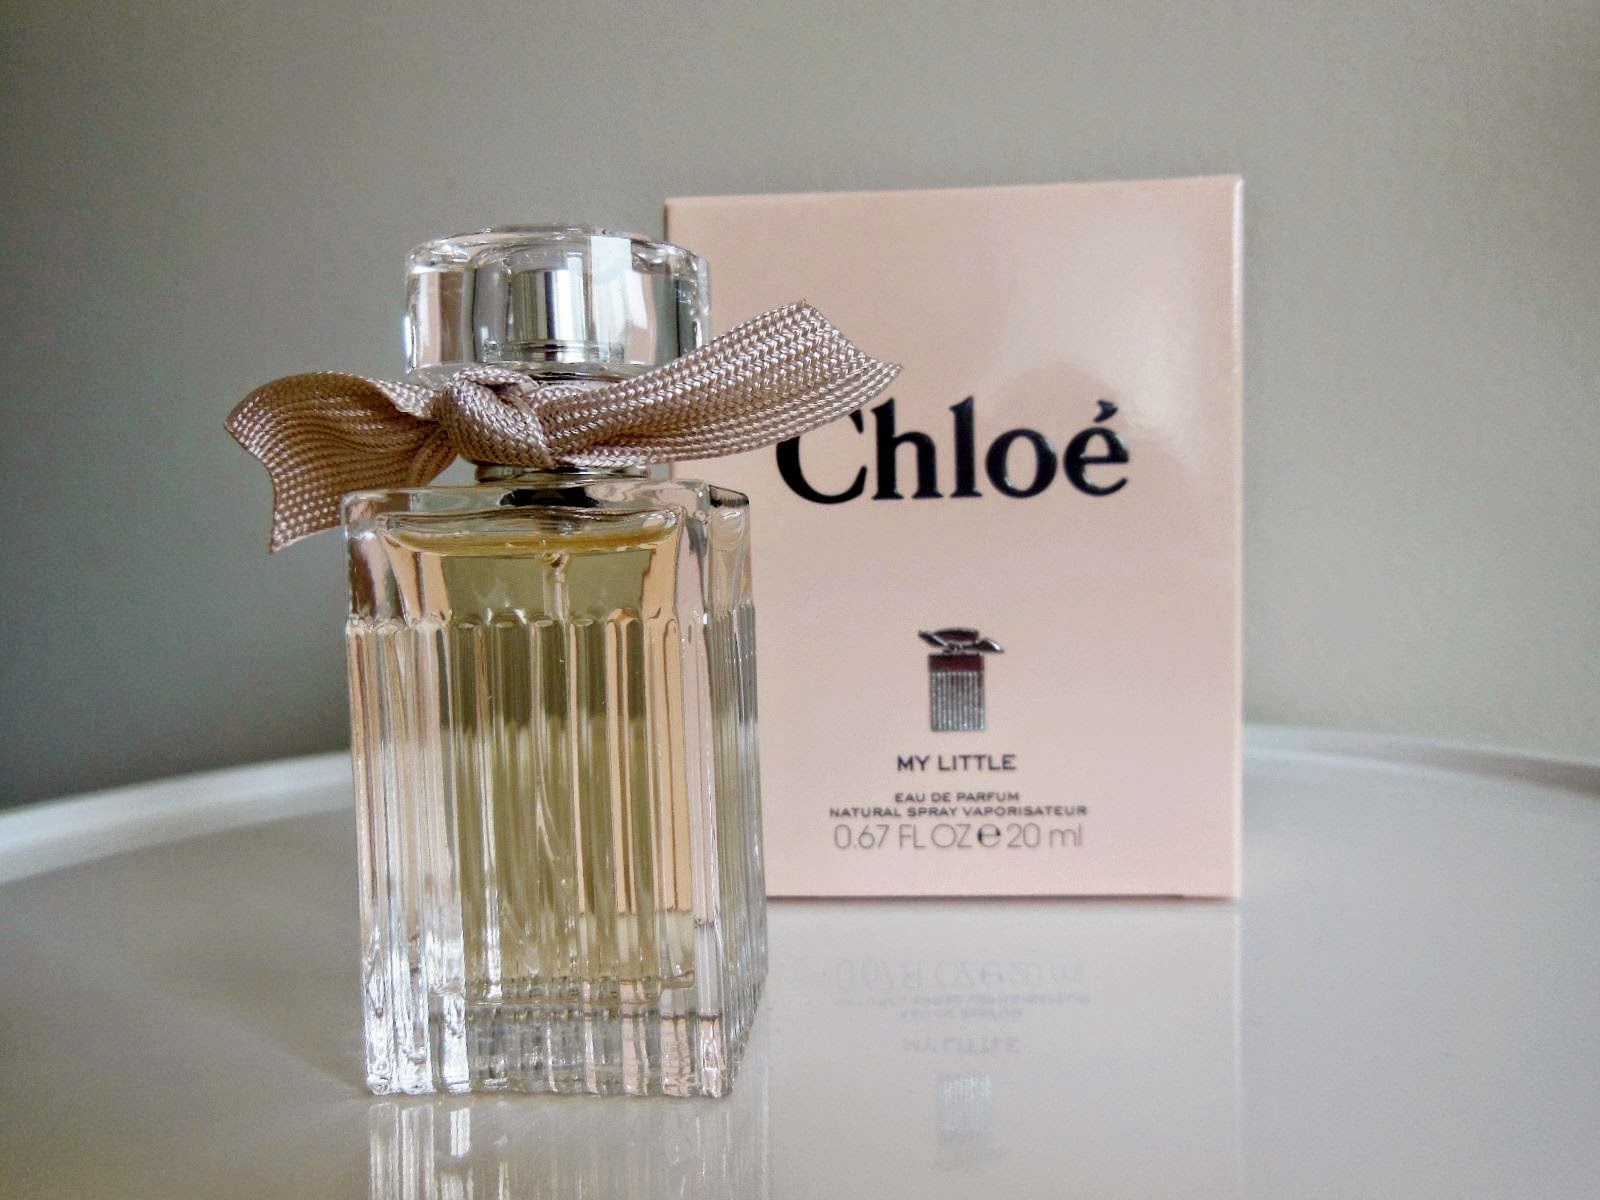 PRODUCT REVIEW: MY LITTLE CHLOES | The Beauty & Lifestyle Hunter